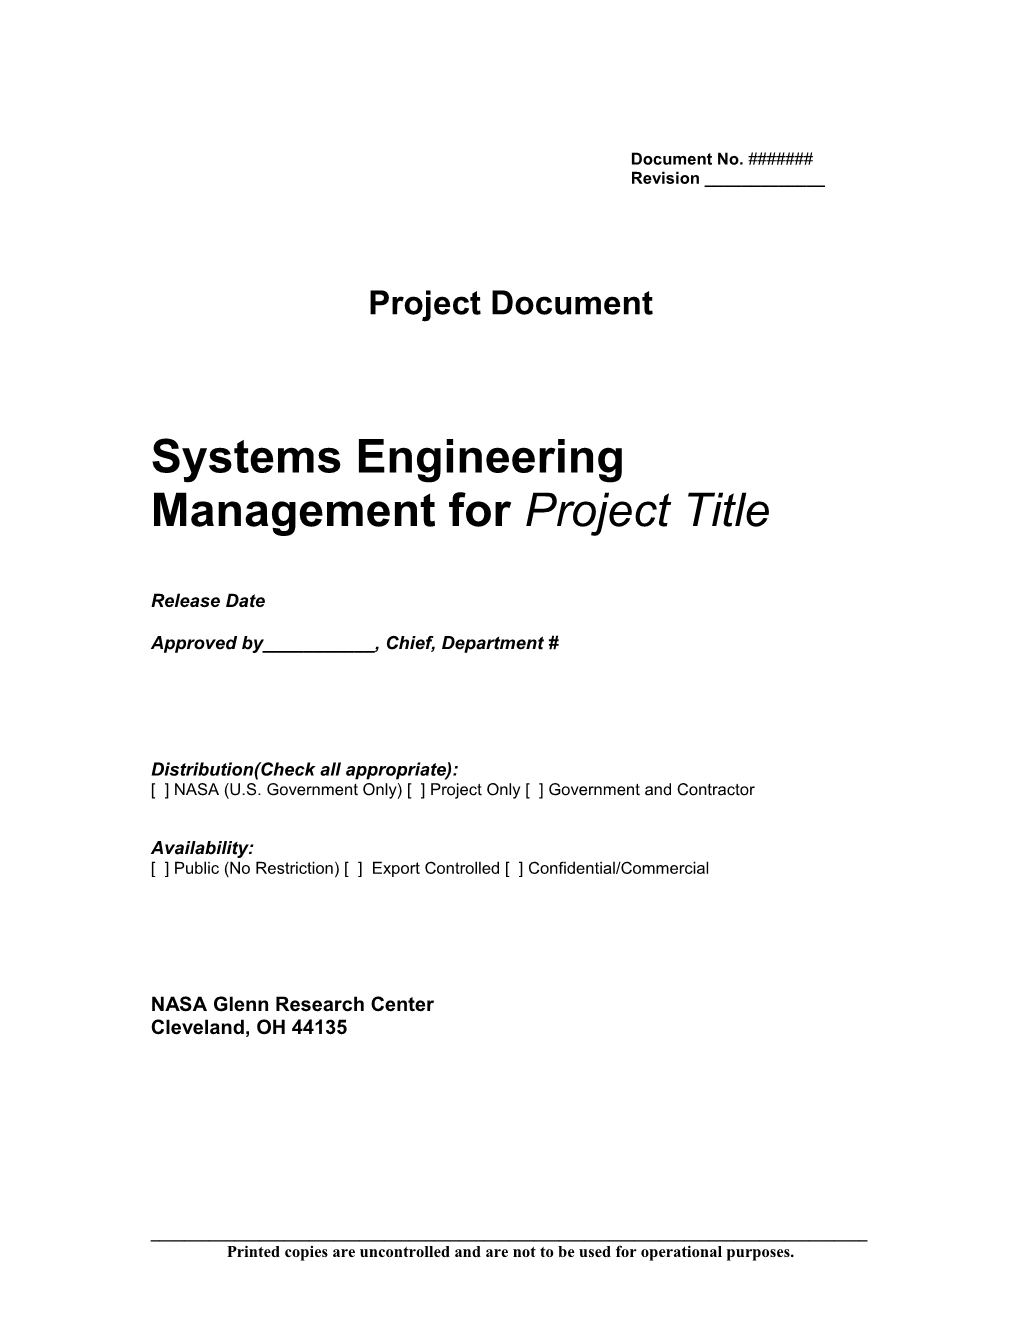 Systems Engineering Management for Project Title